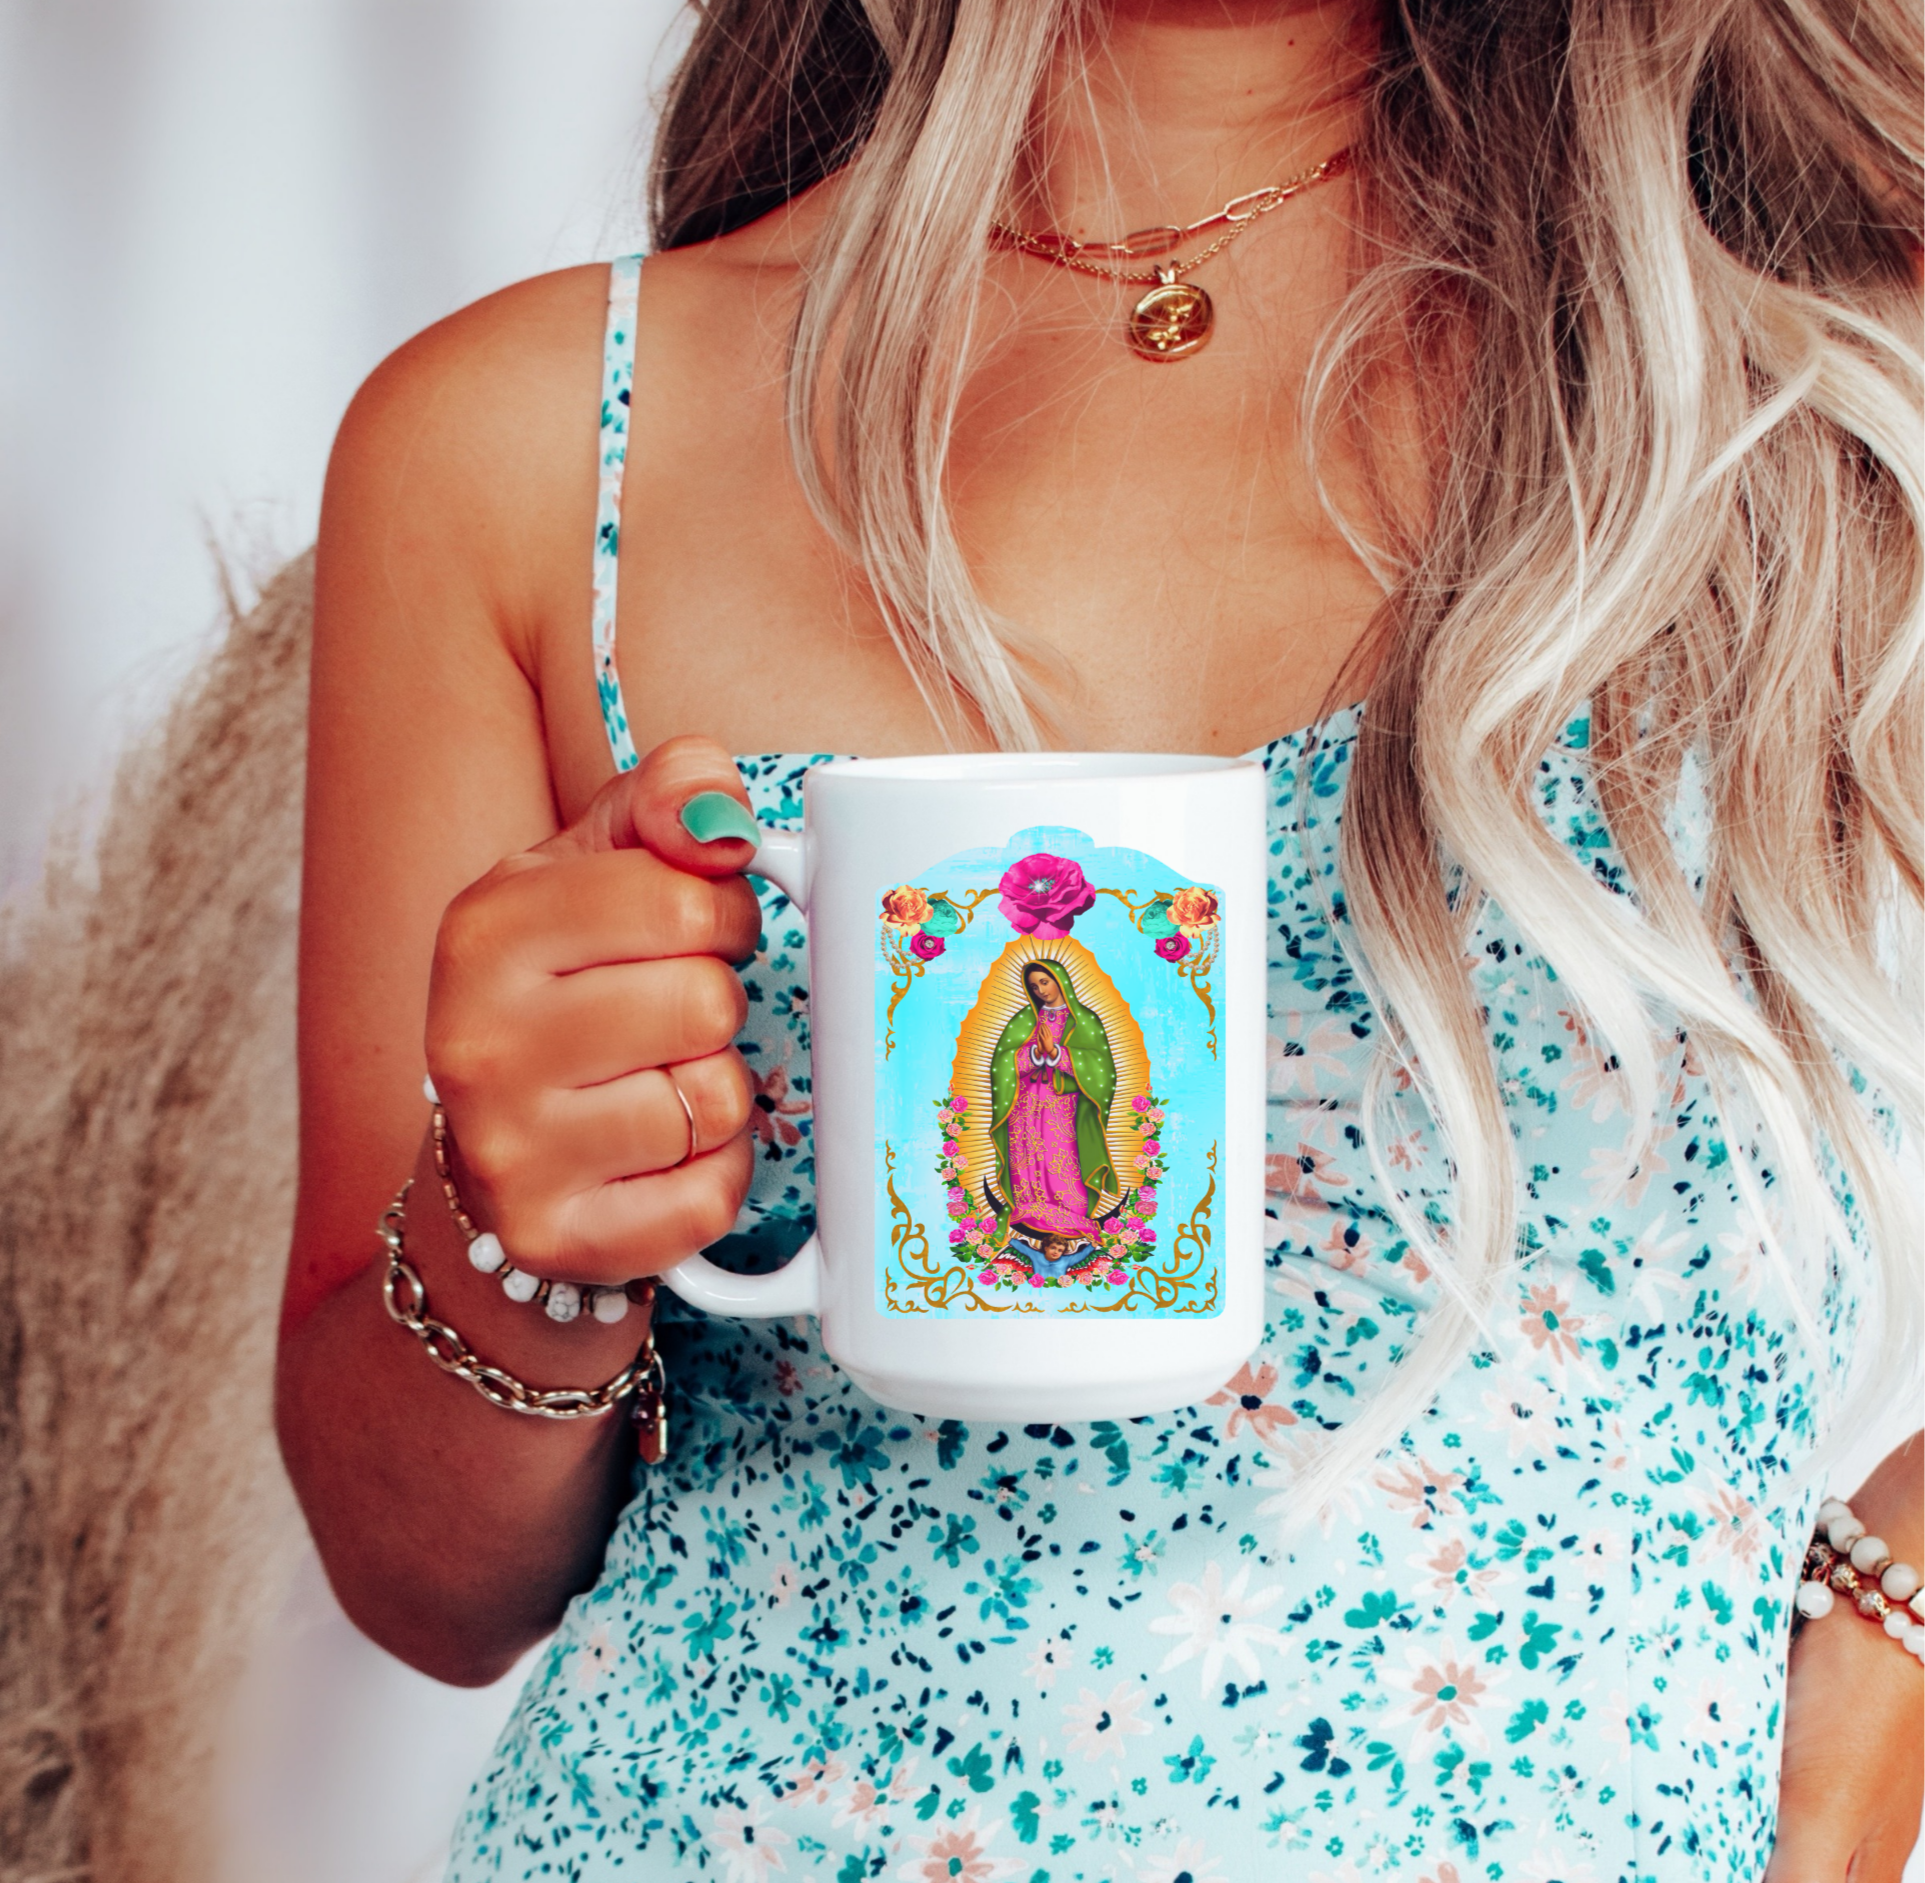 latina woman holding a mug with vibrant and classic depiction of 'La Virgen de Guadalupe' on white background